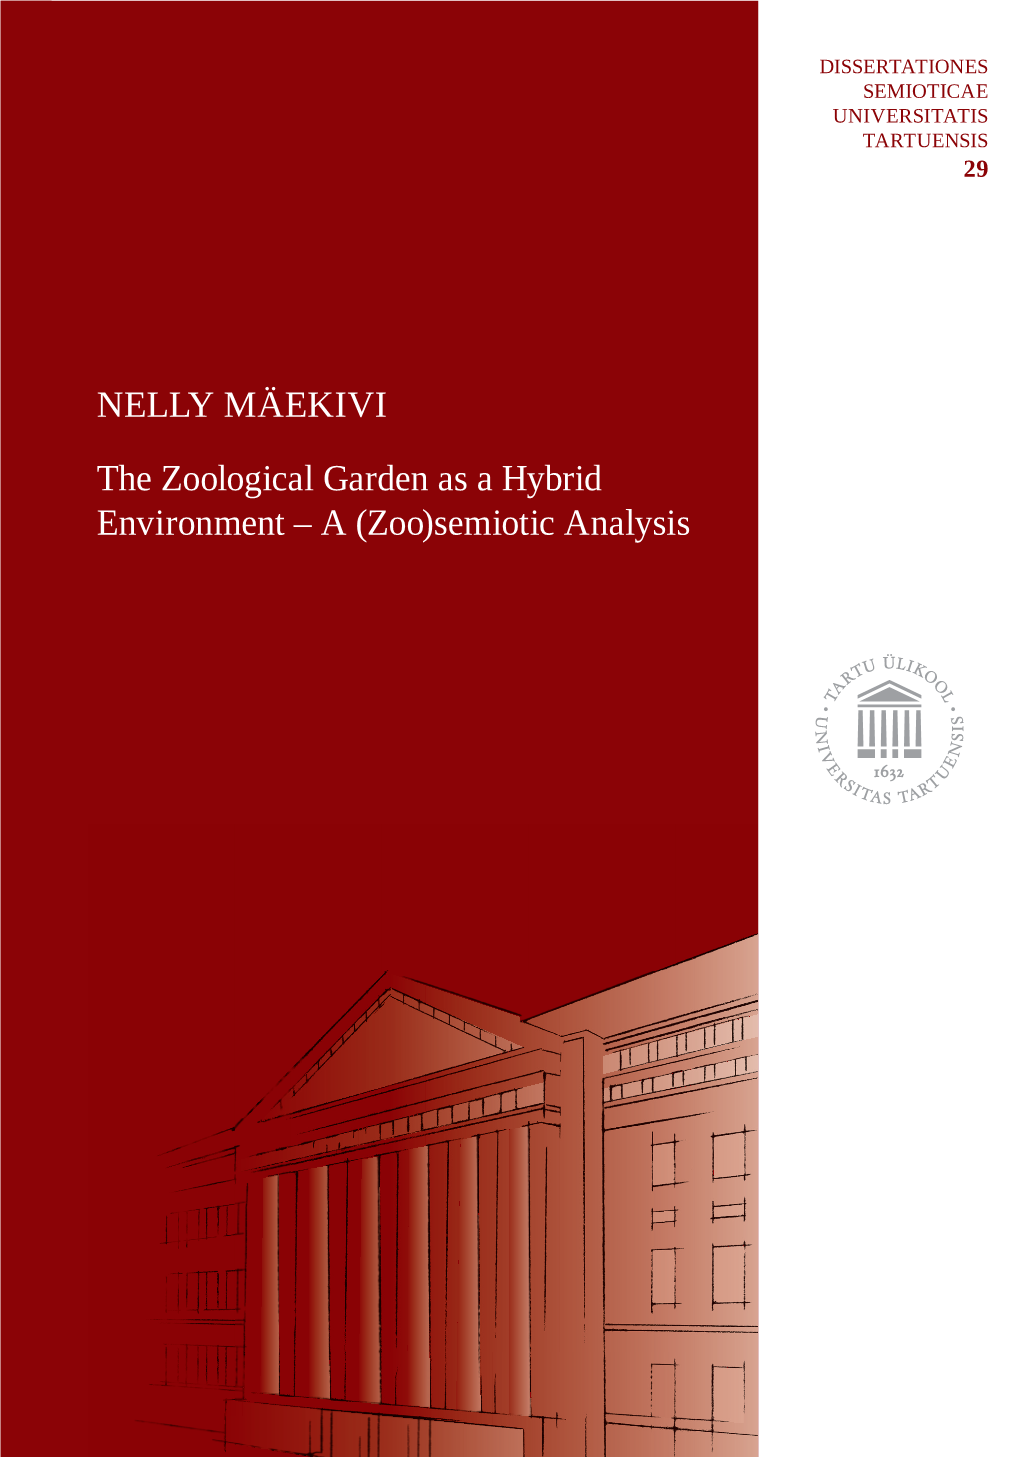 NELLY MÄEKIVI the Zoological Garden As a Hybrid Environment – a (Zoo)Semiotic Analysis